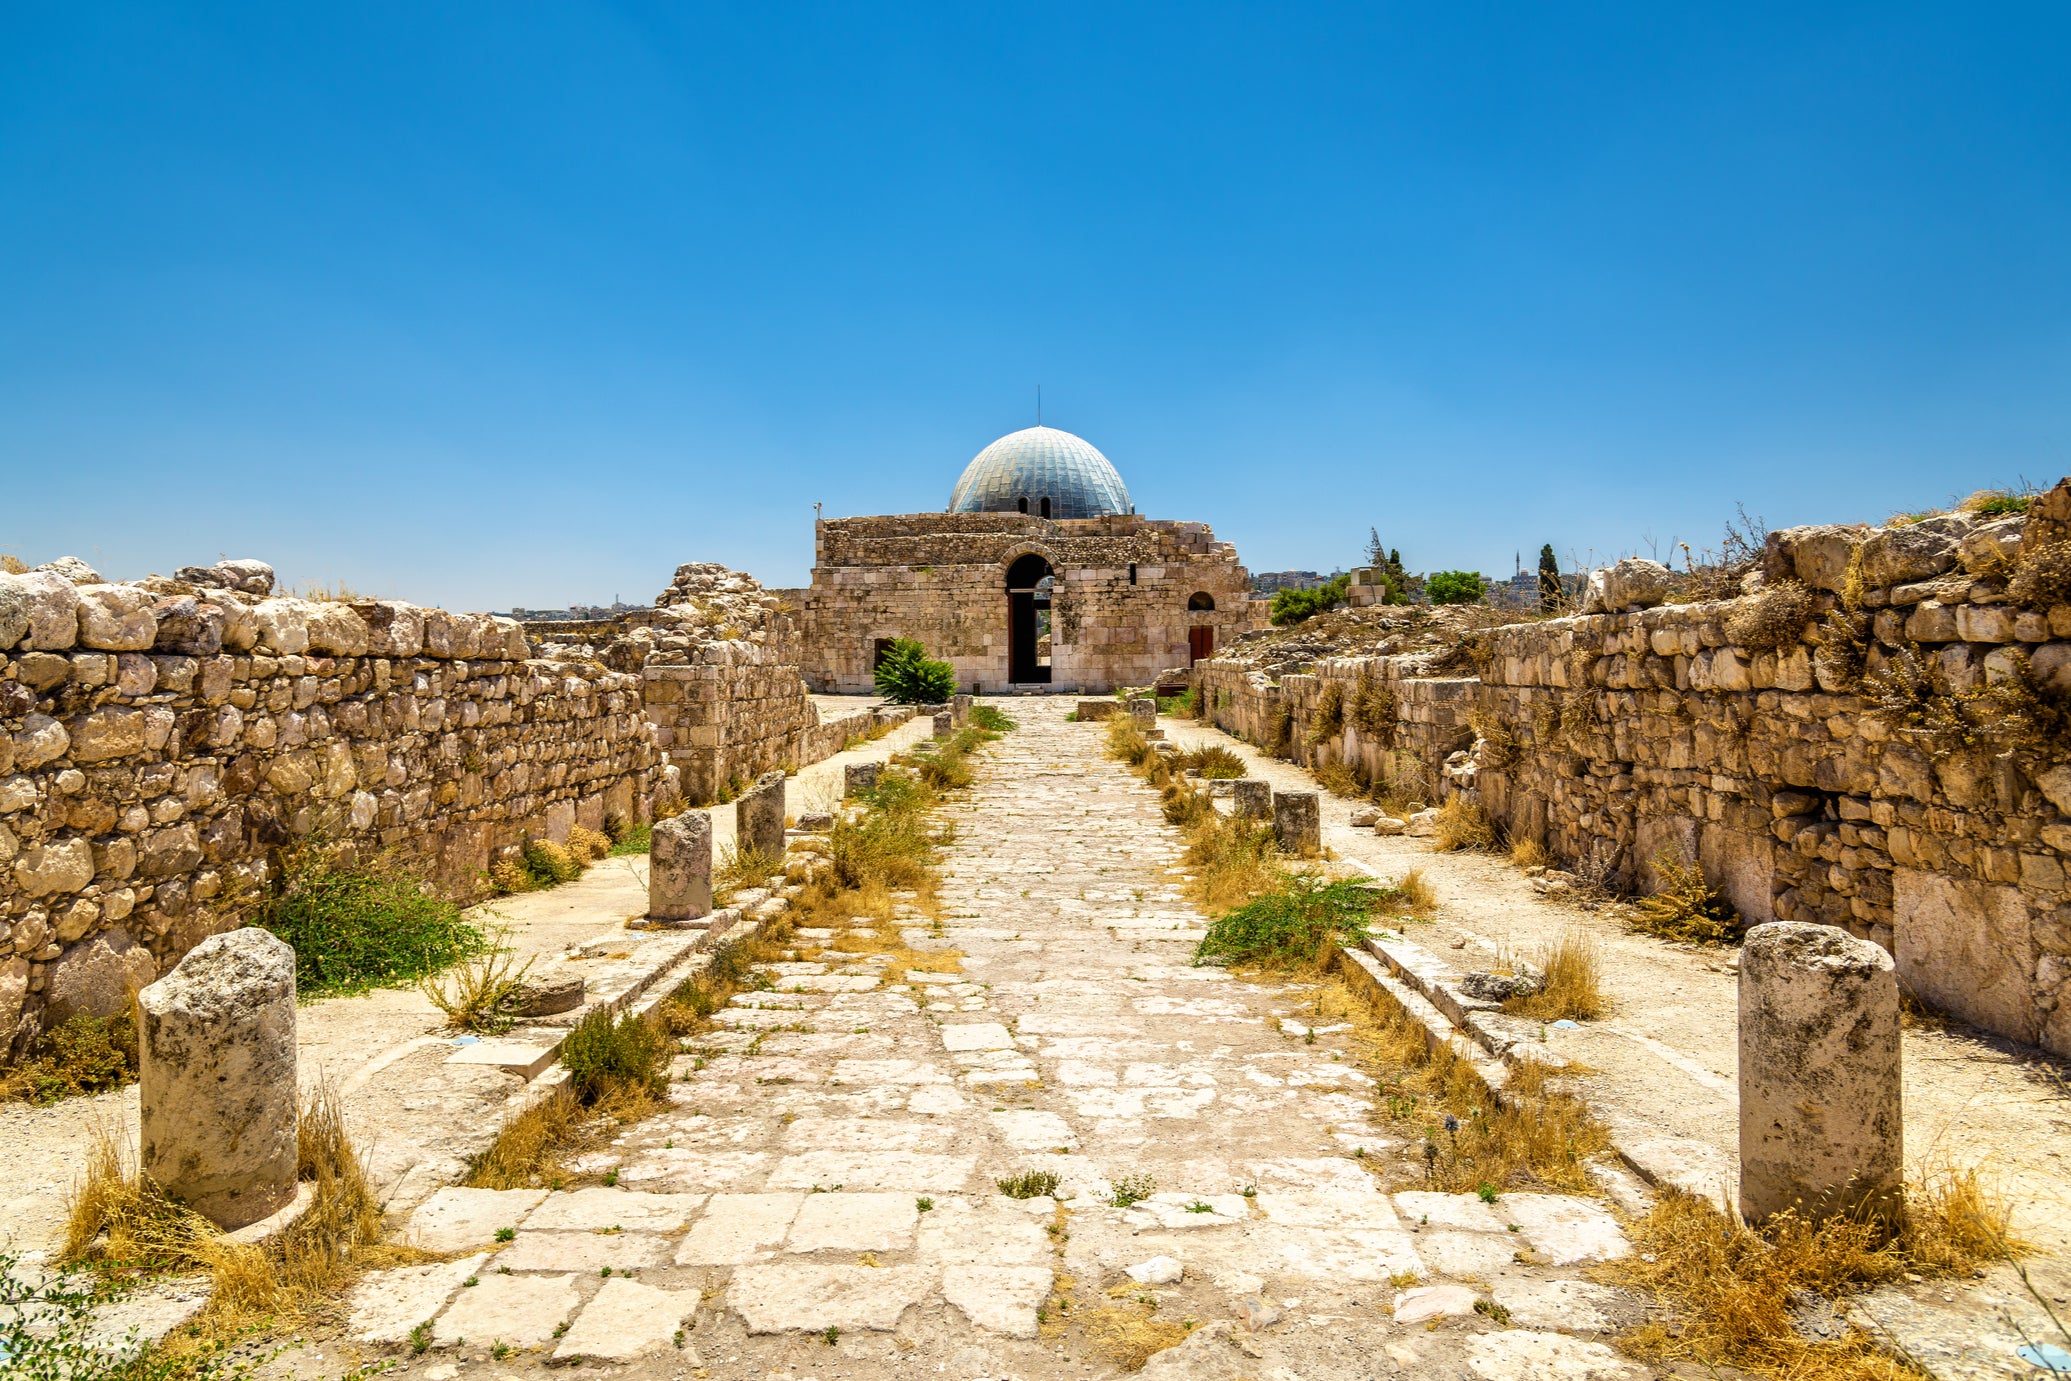 The Umayyad Palace is one of the most important sites in Amman